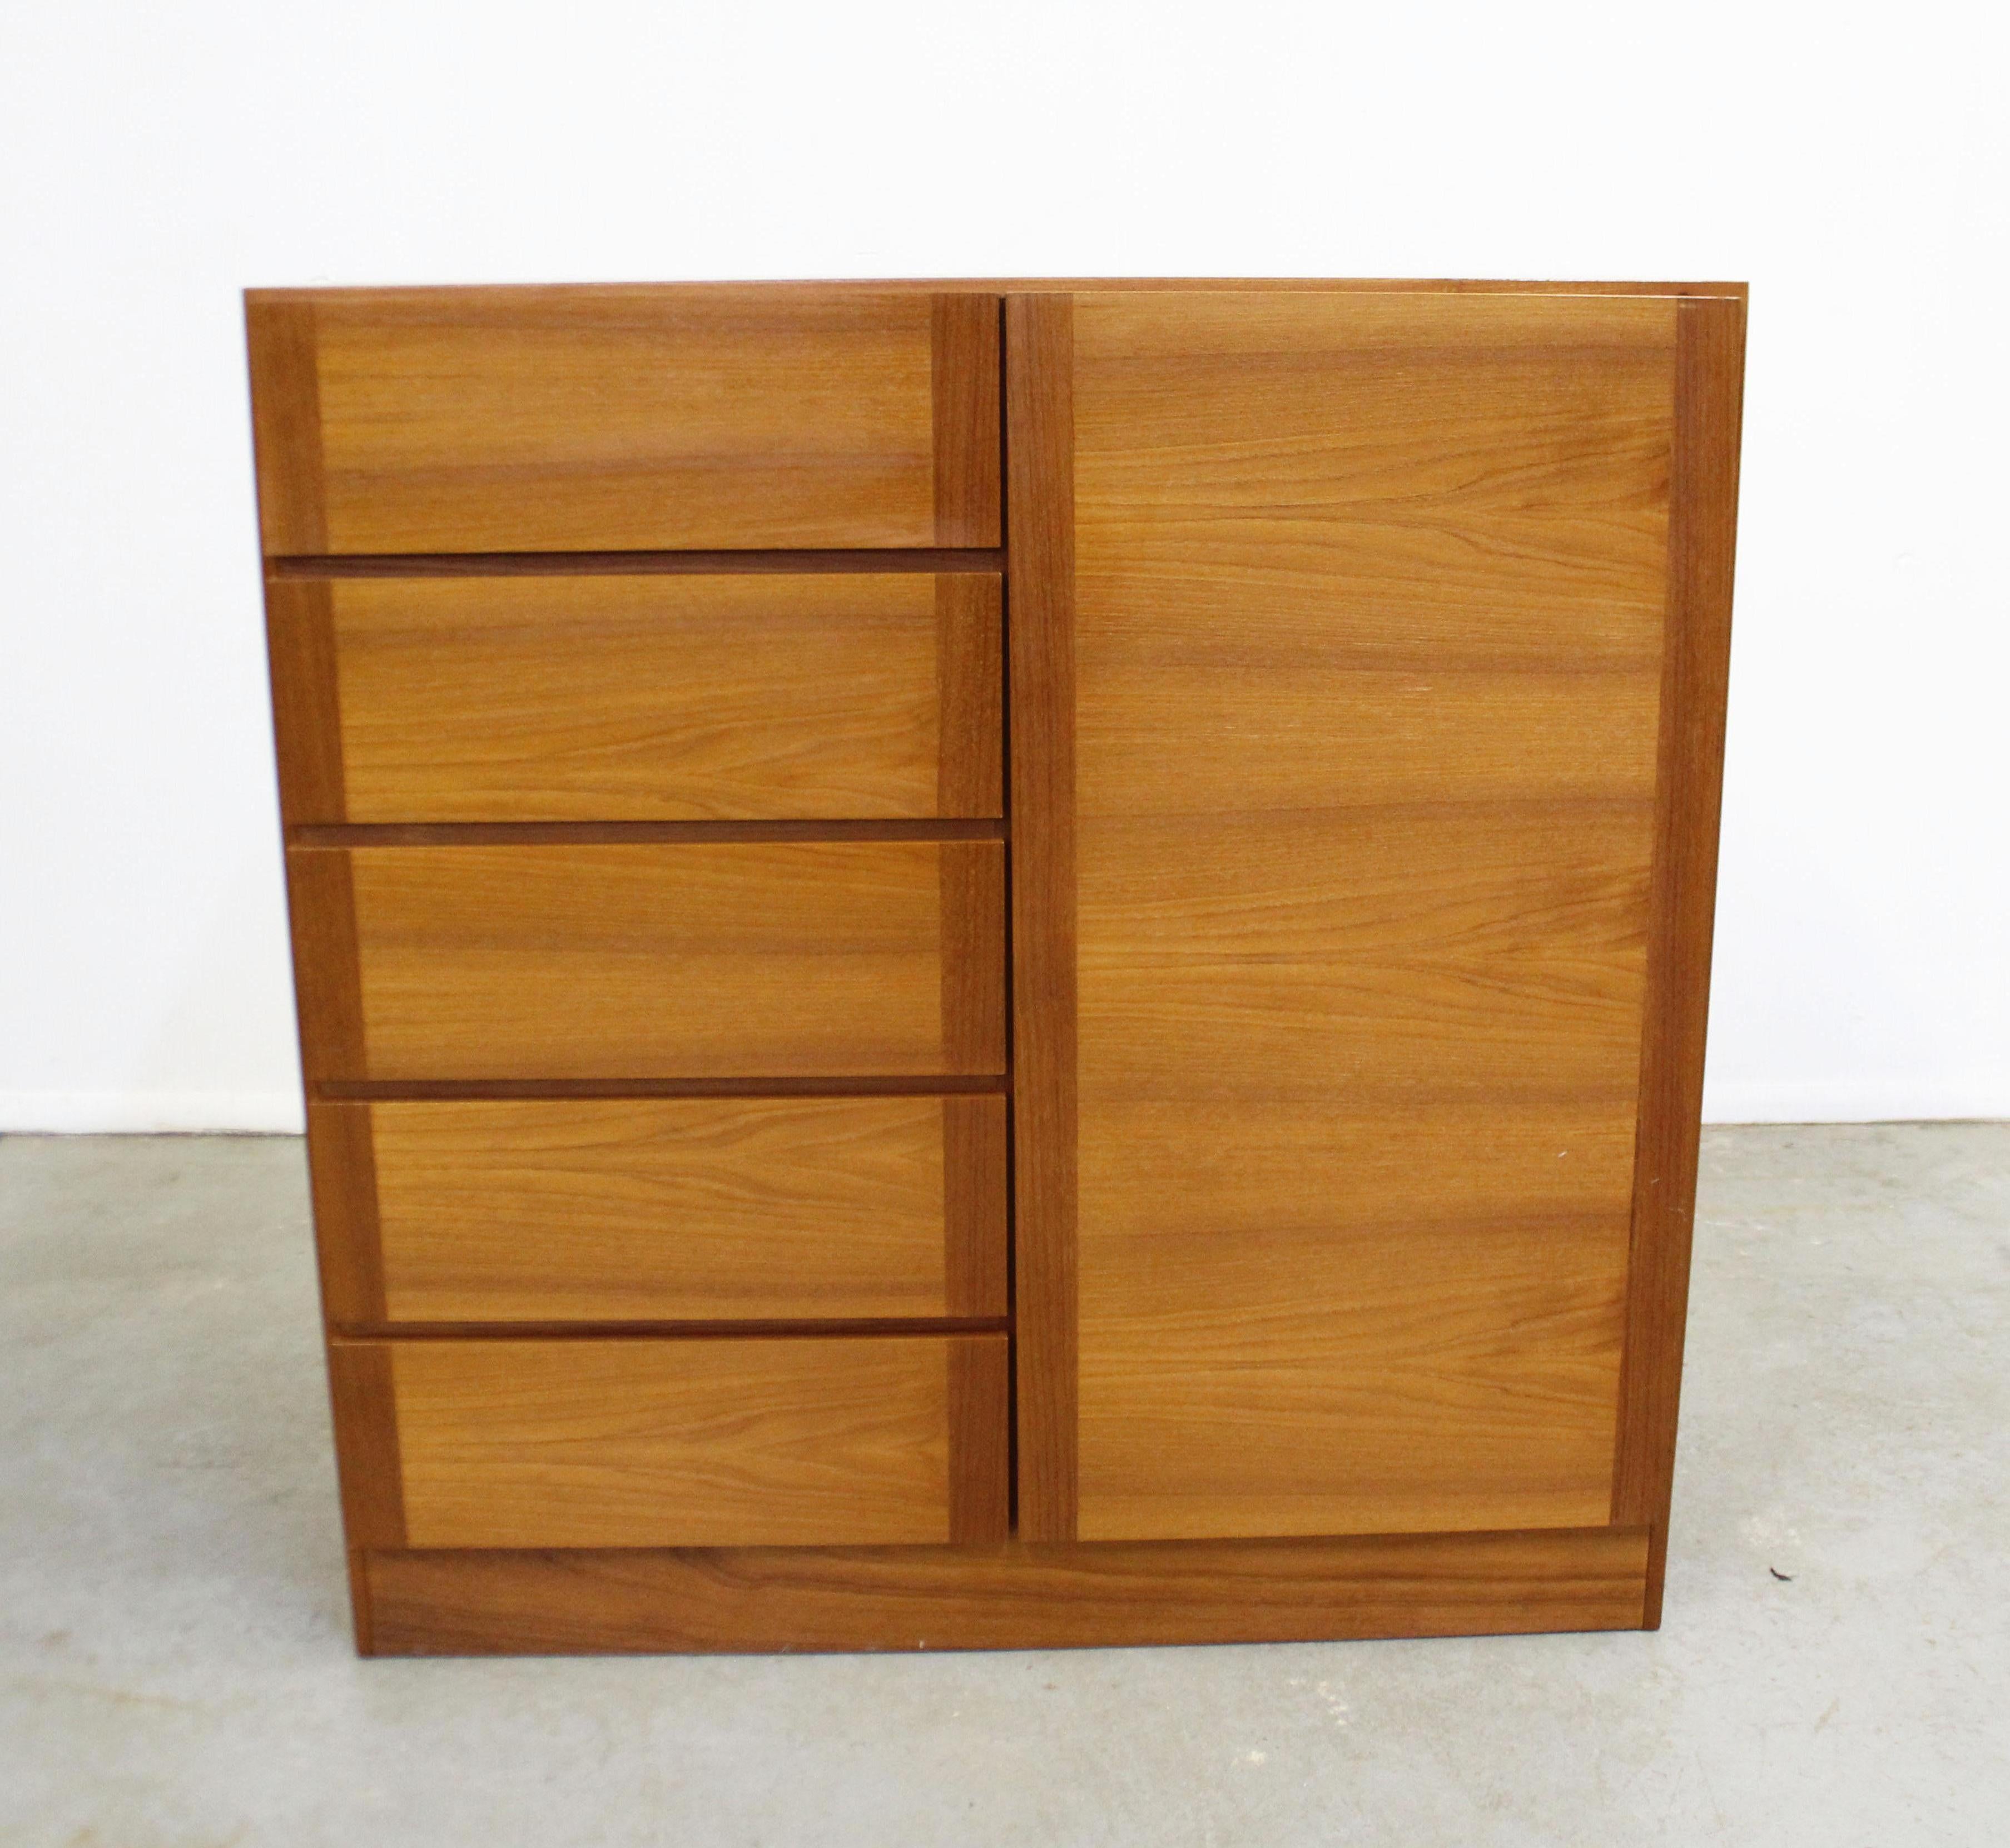 Offered is a Danish modern gentleman's chest by Vinde Mobelfabrik. It's is made with teak and features 5 drawers on one side and shelving on the other. It is in good vintage condition with minor surface scratches/ wear. It is marked by Vinde